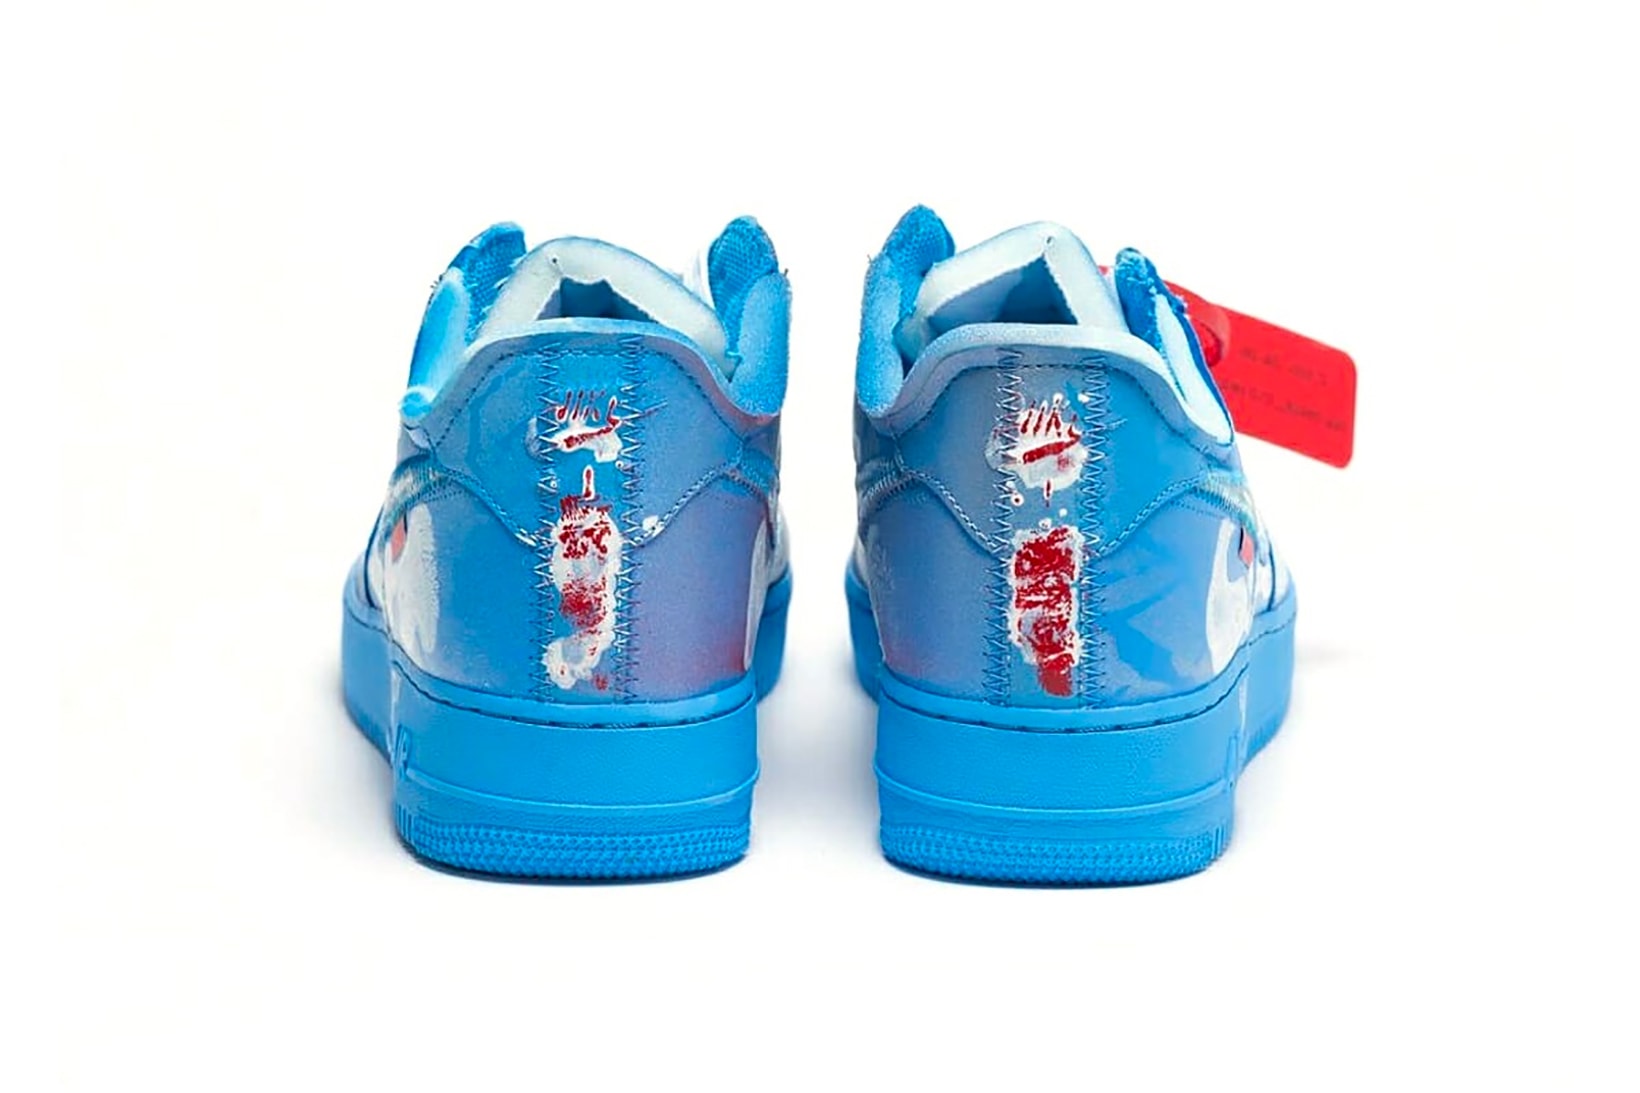 virgil abloh mca chicago cassius hirst nike air force 1 07 sneakers collaboration blue release footwear shoes sneakerhead